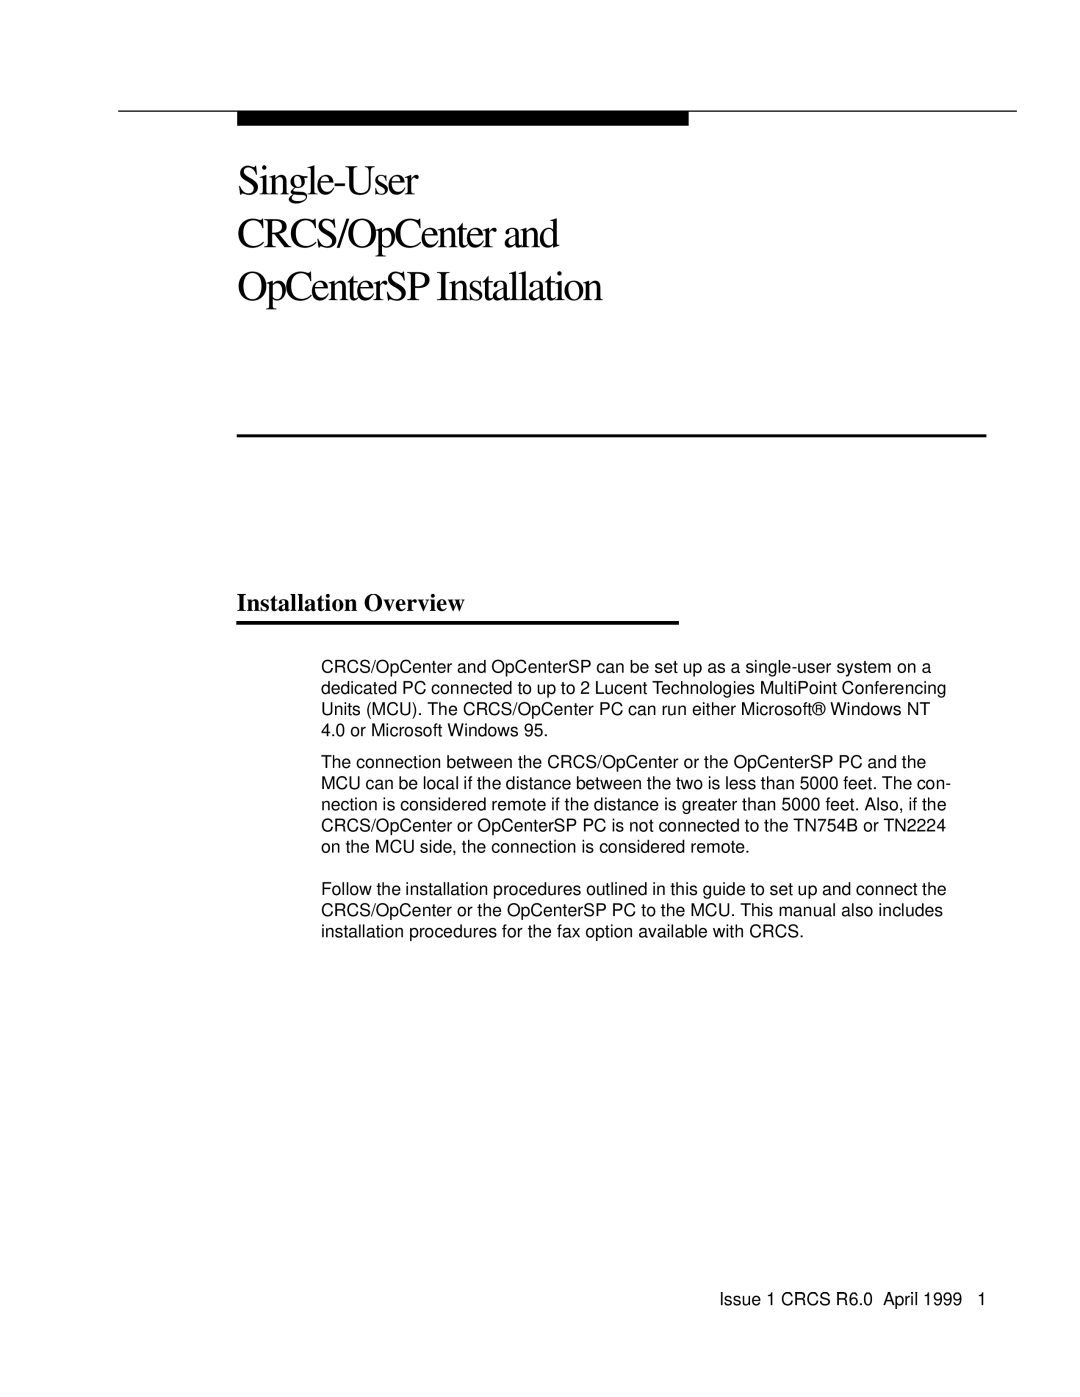 Lucent Technologies 6 manual Installation Overview, Single-User CRCS/OpCenter and, OpCenterSP Installation 